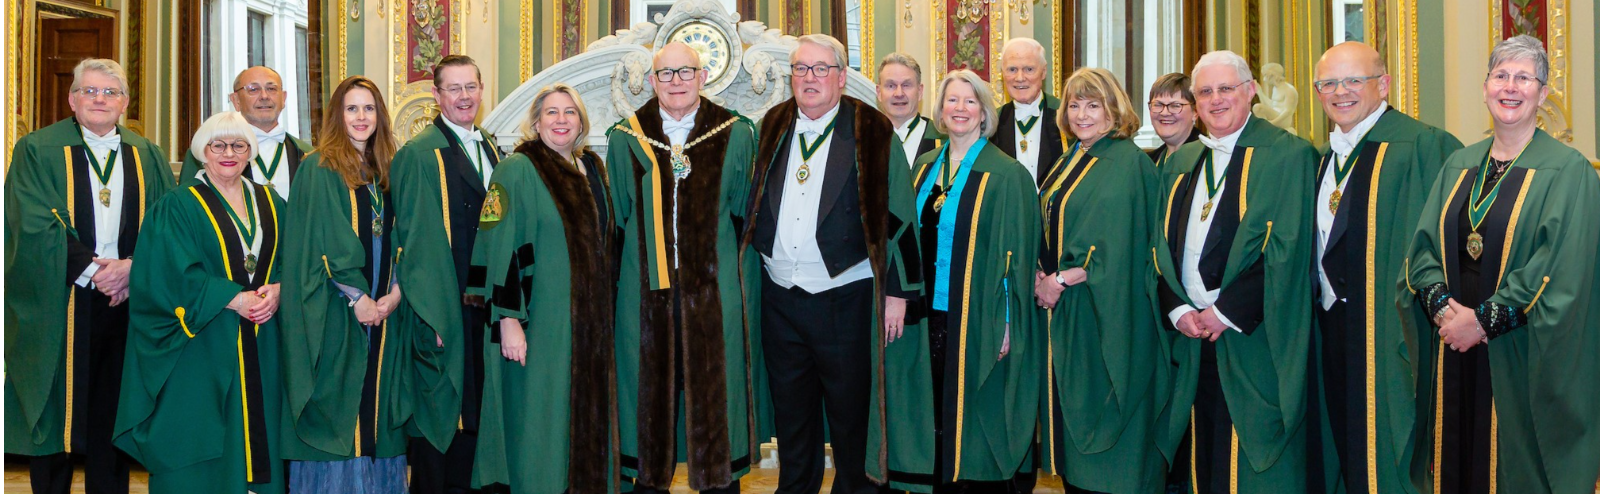 Image shows members of our governing Court (7 women, 10 men) wearing ceremonial gowns, ribbons and badges of office.  They are all smiling broadly.